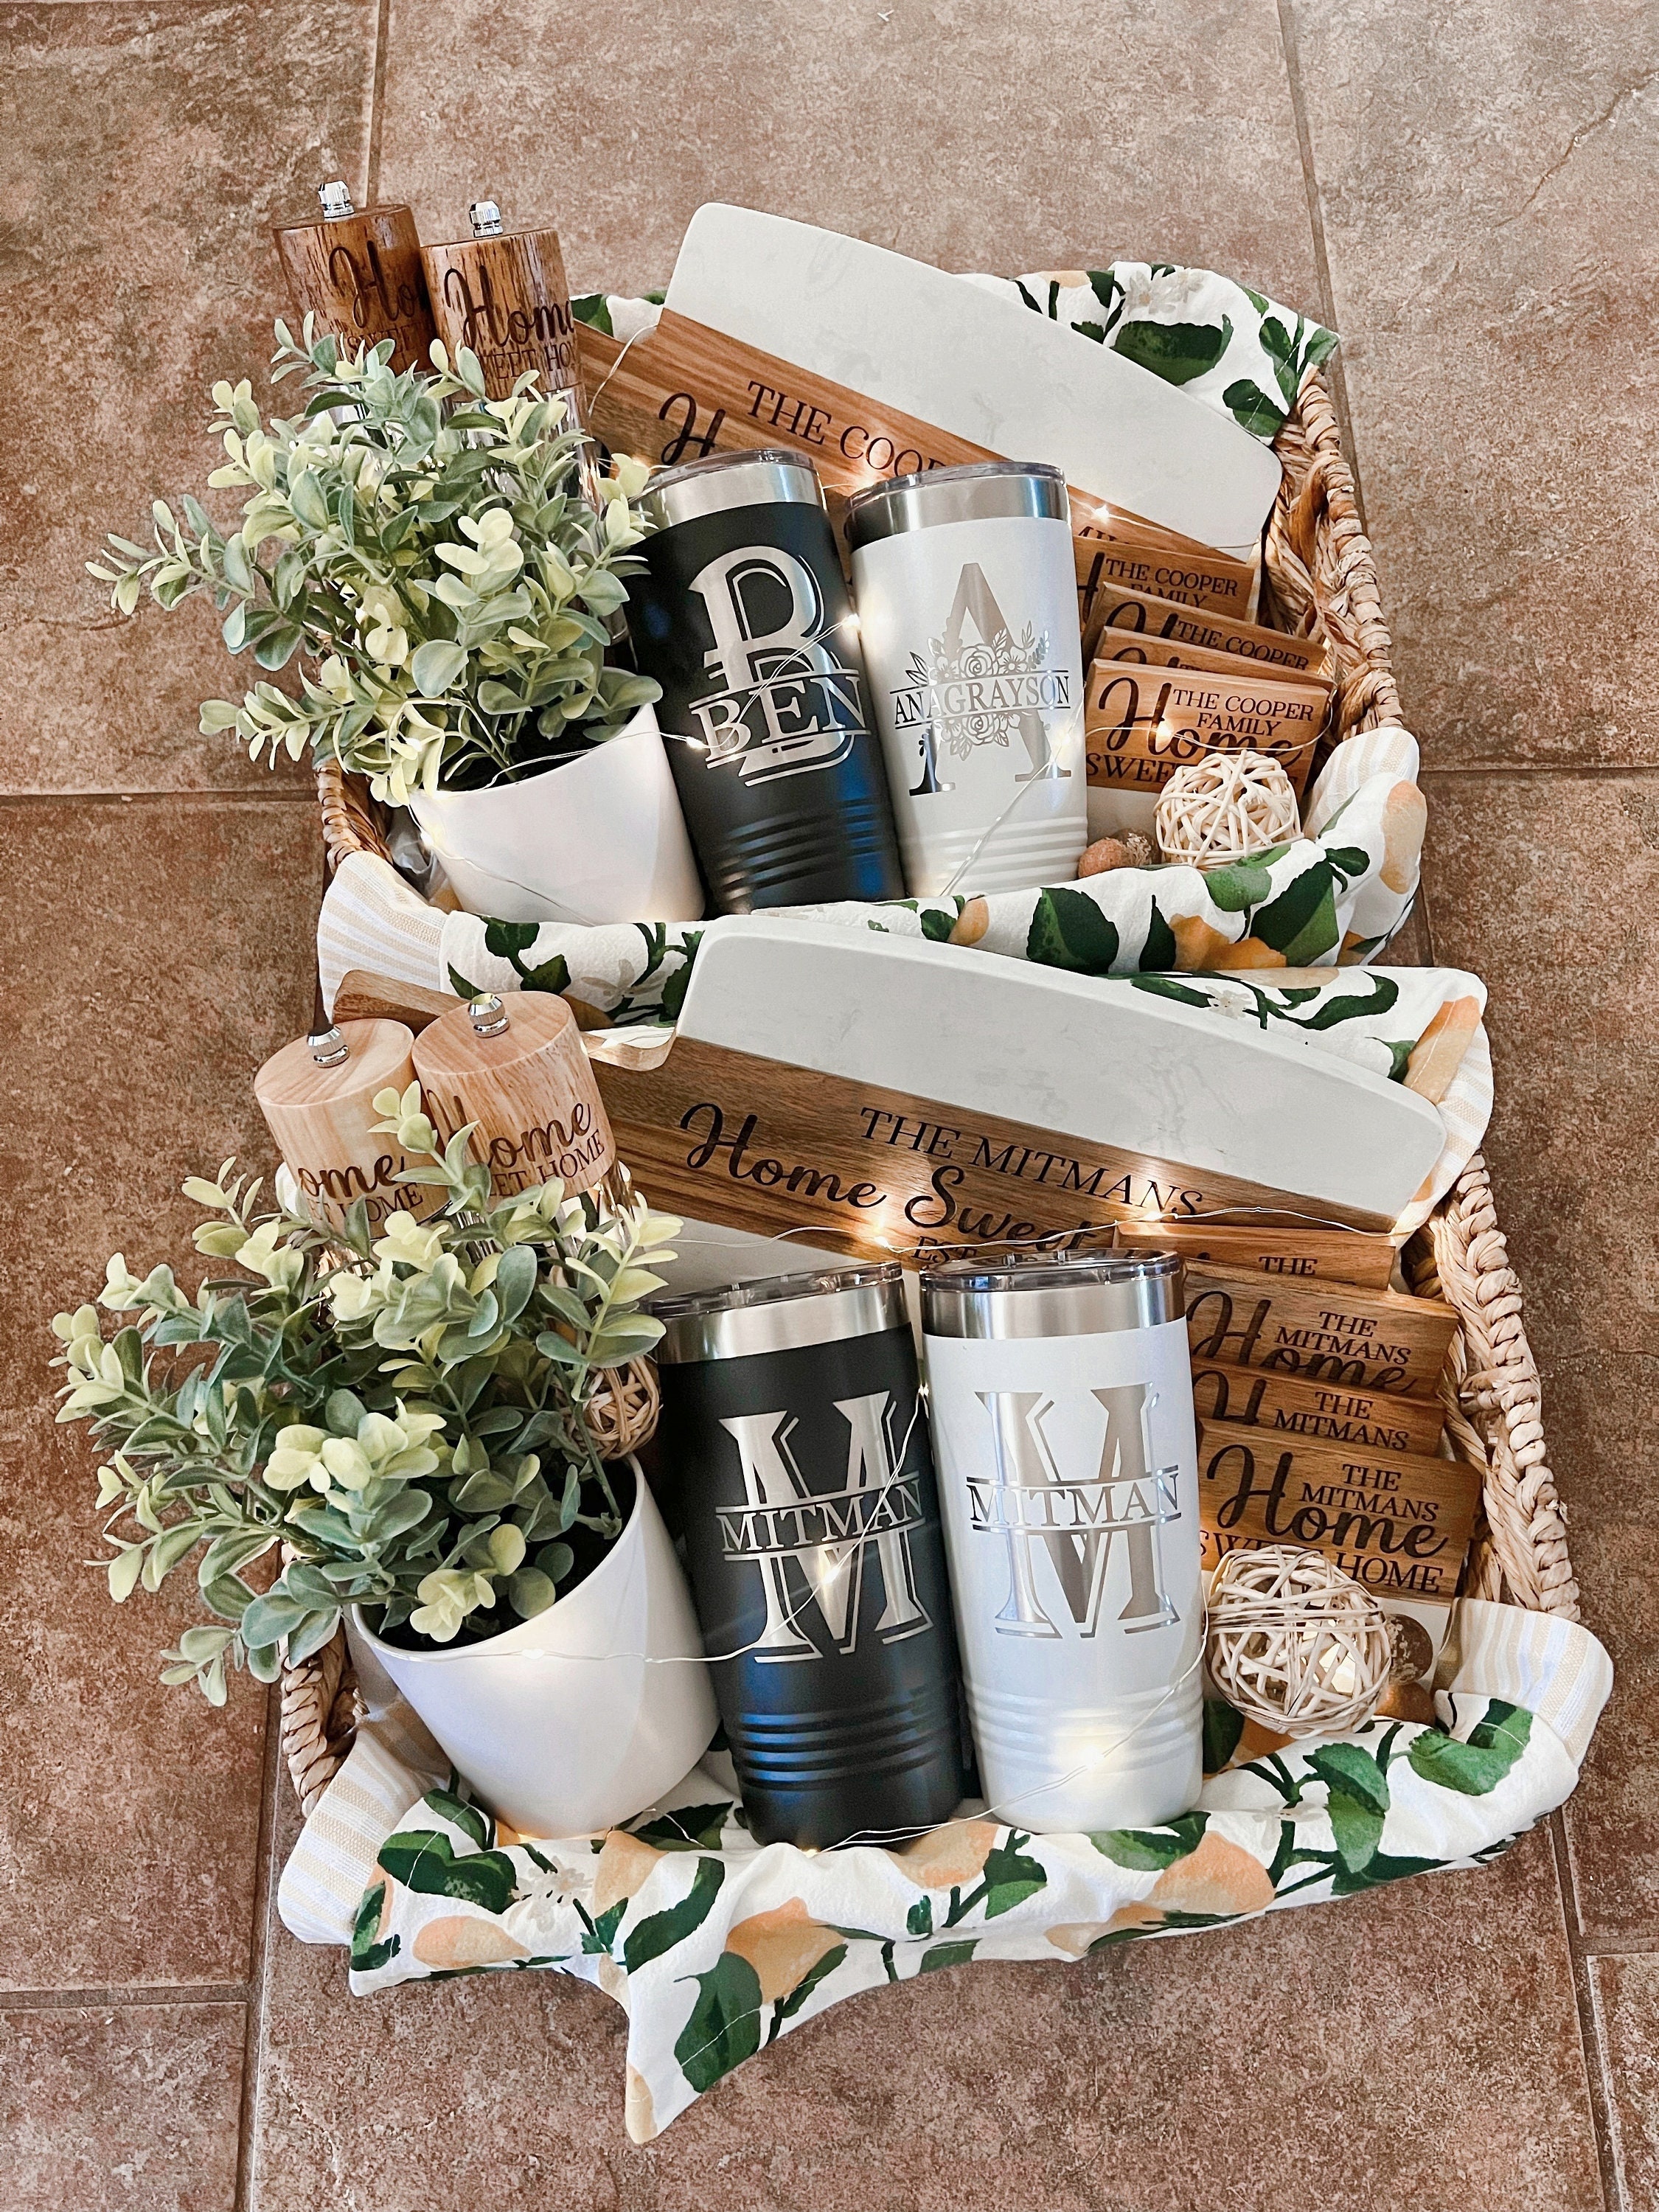 Luxury Housewarming Gift Basket - Huge, Deluxe - Filled with Gifts for New House - Realtors Closing Gifts for Buyers - Home - Custom Gifts - Make